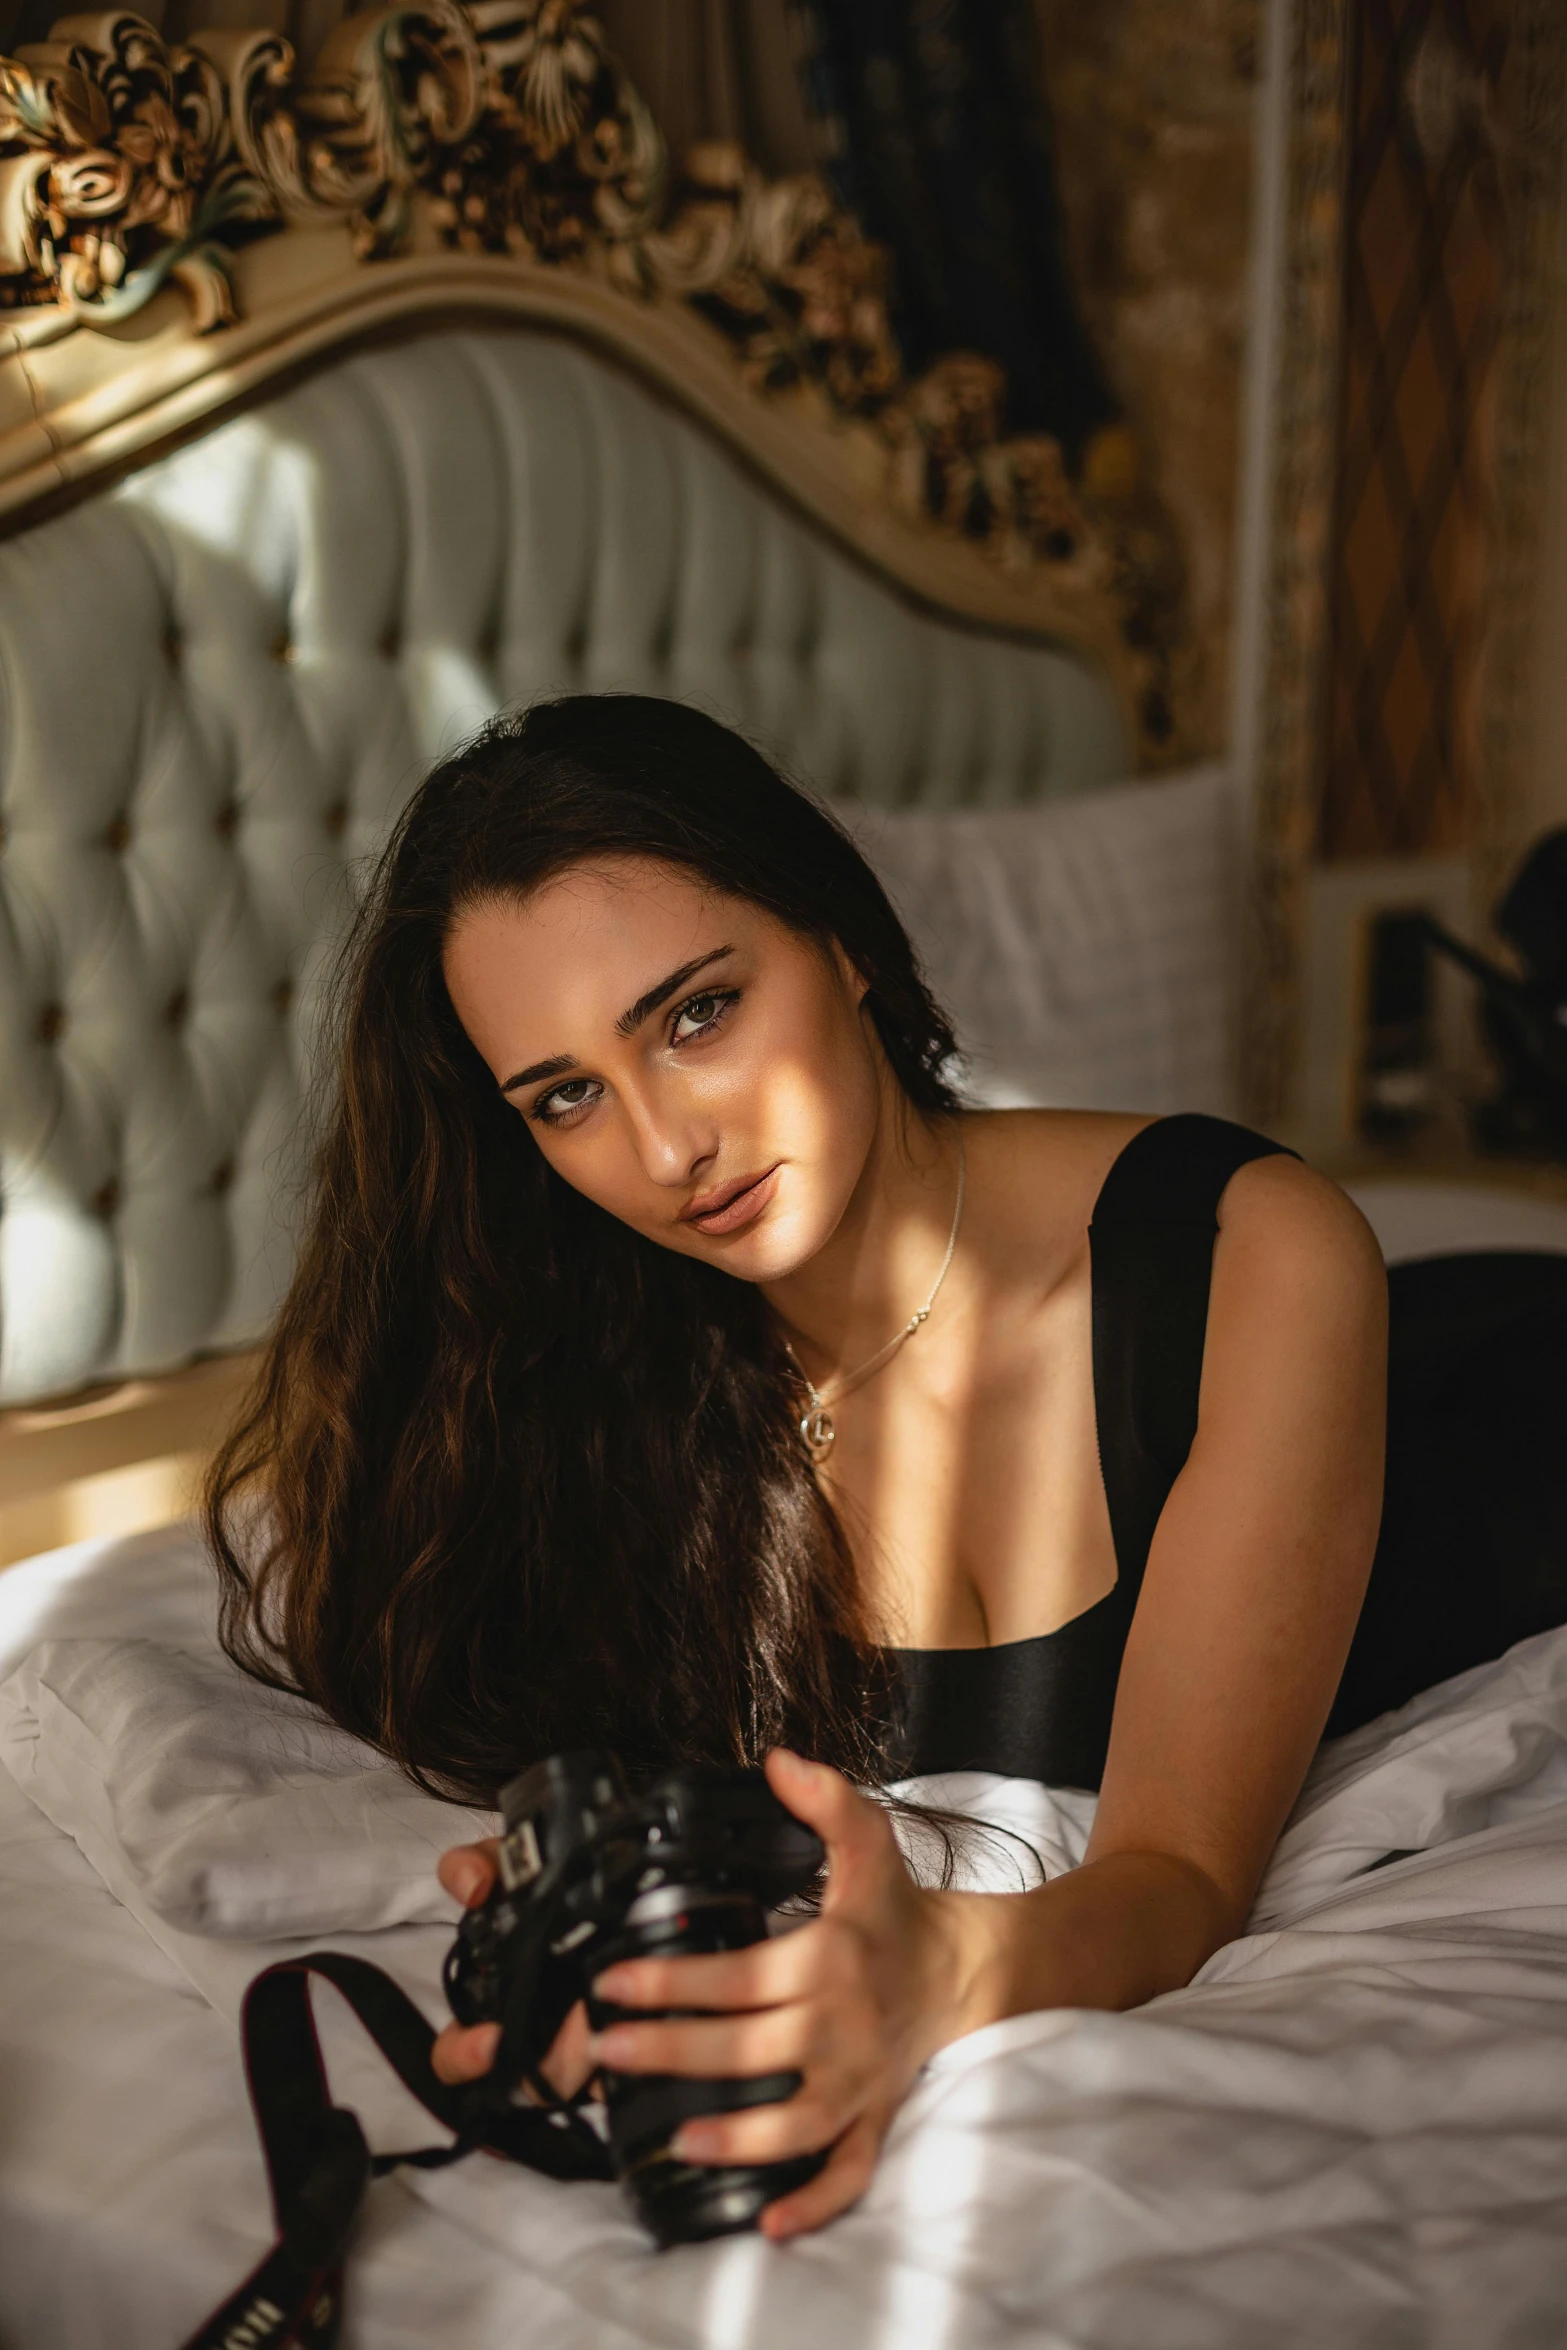 a woman with long dark hair lying in bed holding her camera